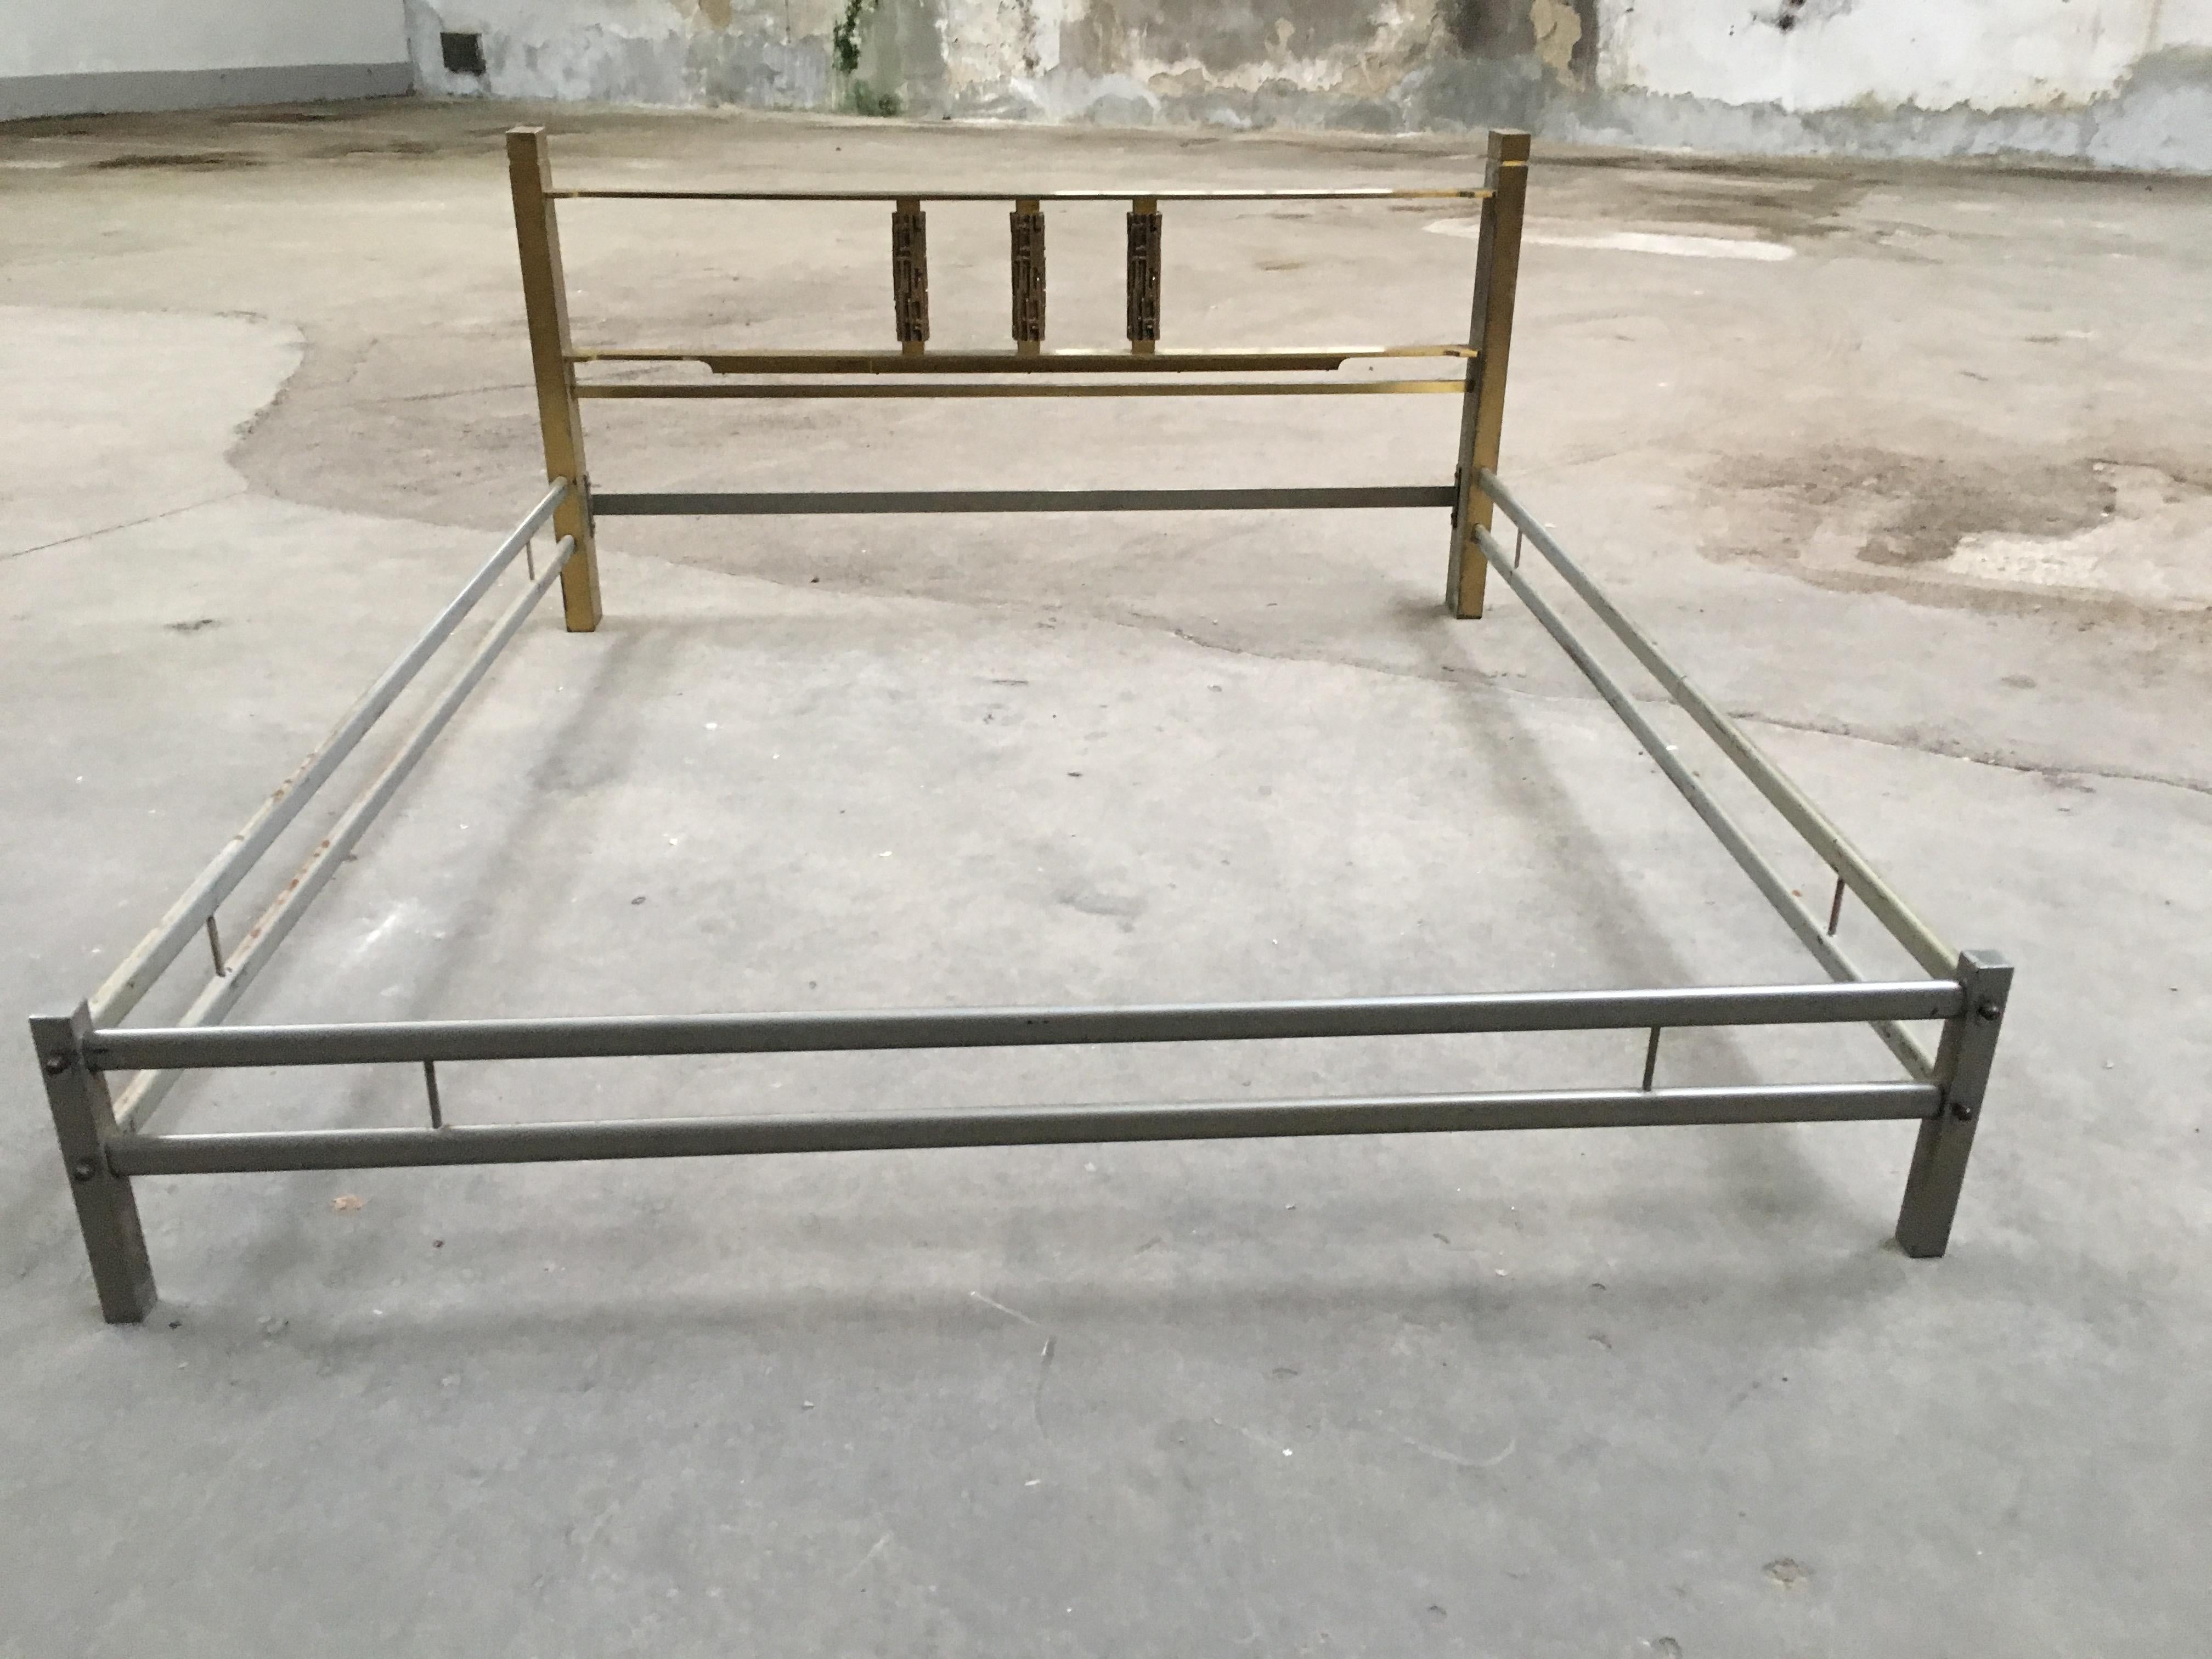 Mid-Century Modern Italian bronze bed by Luciano Frigerio for 'Frigerio Di Desio' from 1970s. 
The bed needs a bed-net and a mattress of cm.165 width and cm. 190 length 
Bed frame measurements: cm.176 x 211 x H 89.